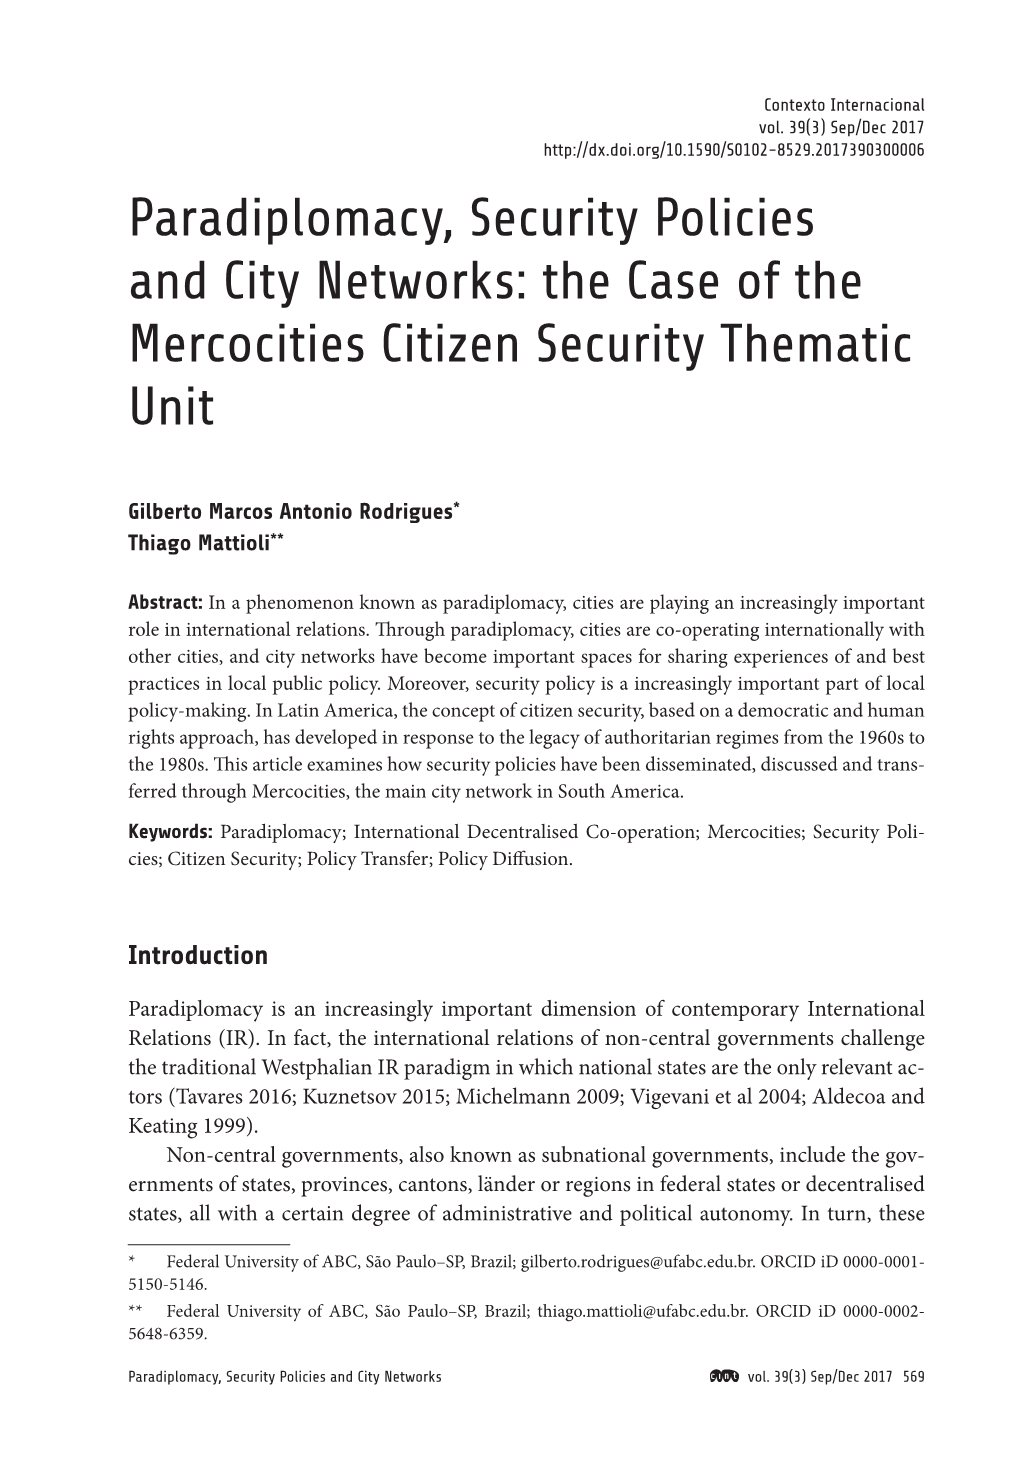 Paradiplomacy, Security Policies and City Networks: the Case of the Rodrigues & Mattioli Mercocities Citizen Security Thematic Unit